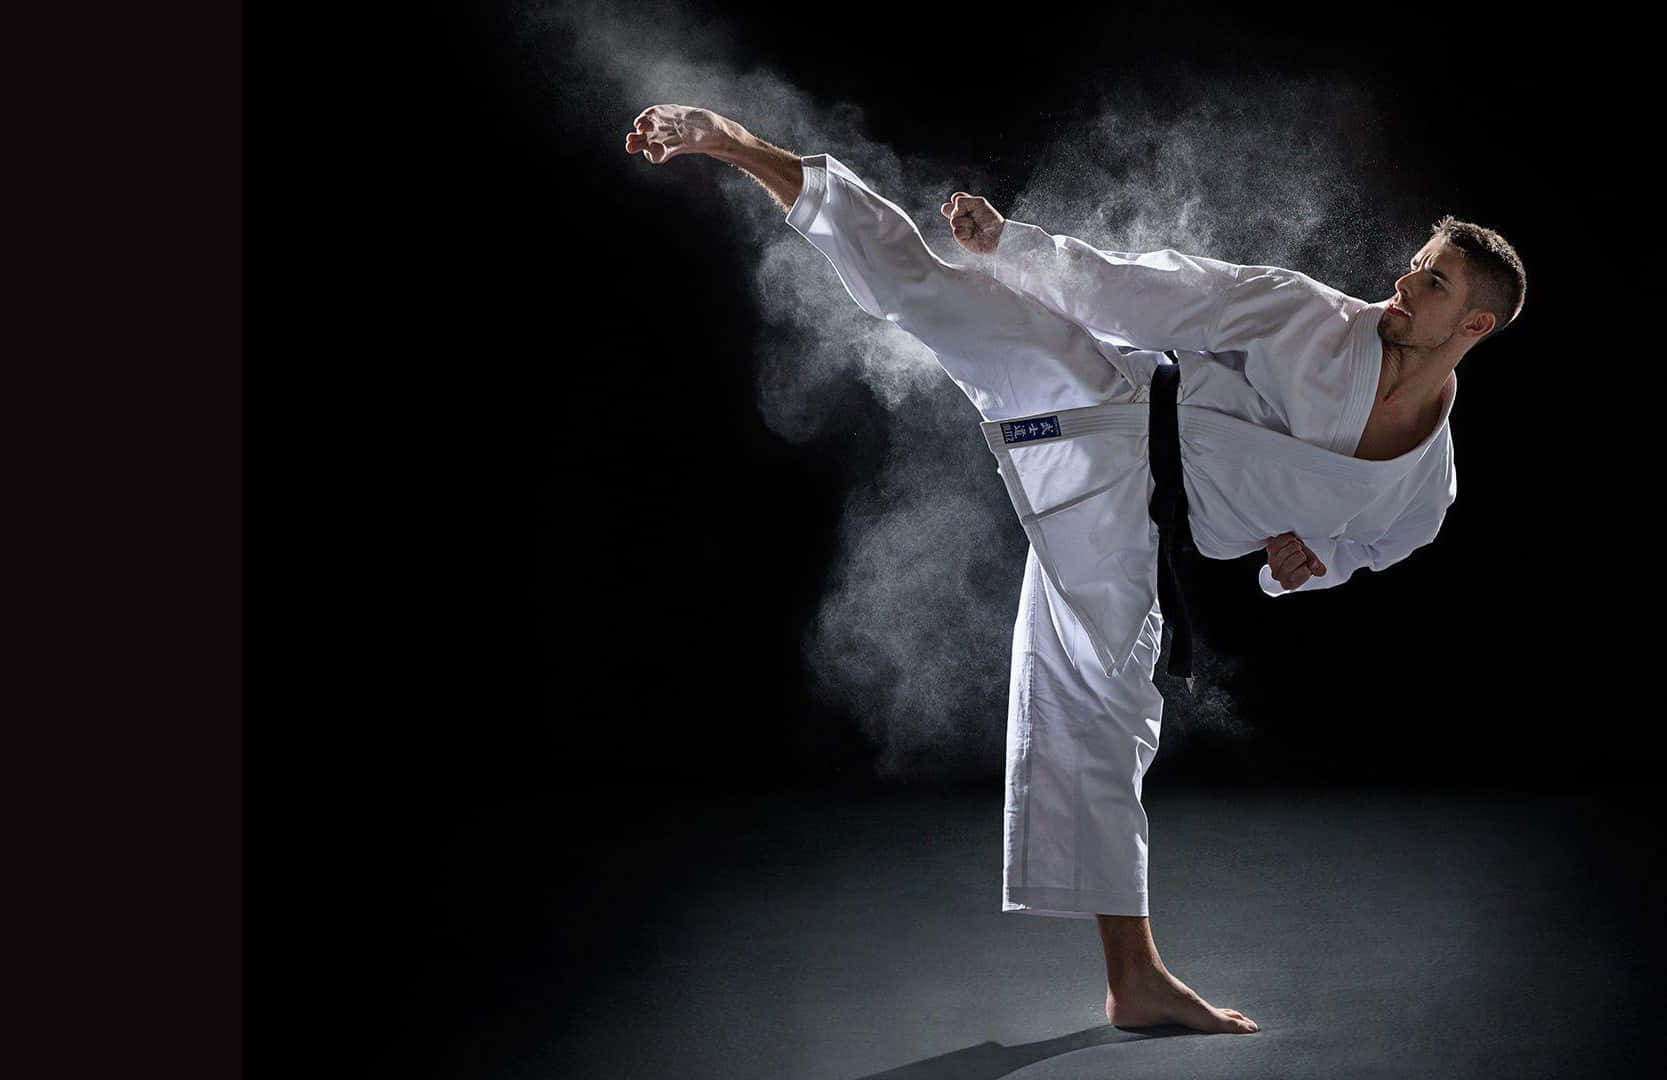 Martial artist striking a pose in traditional uniform Wallpaper